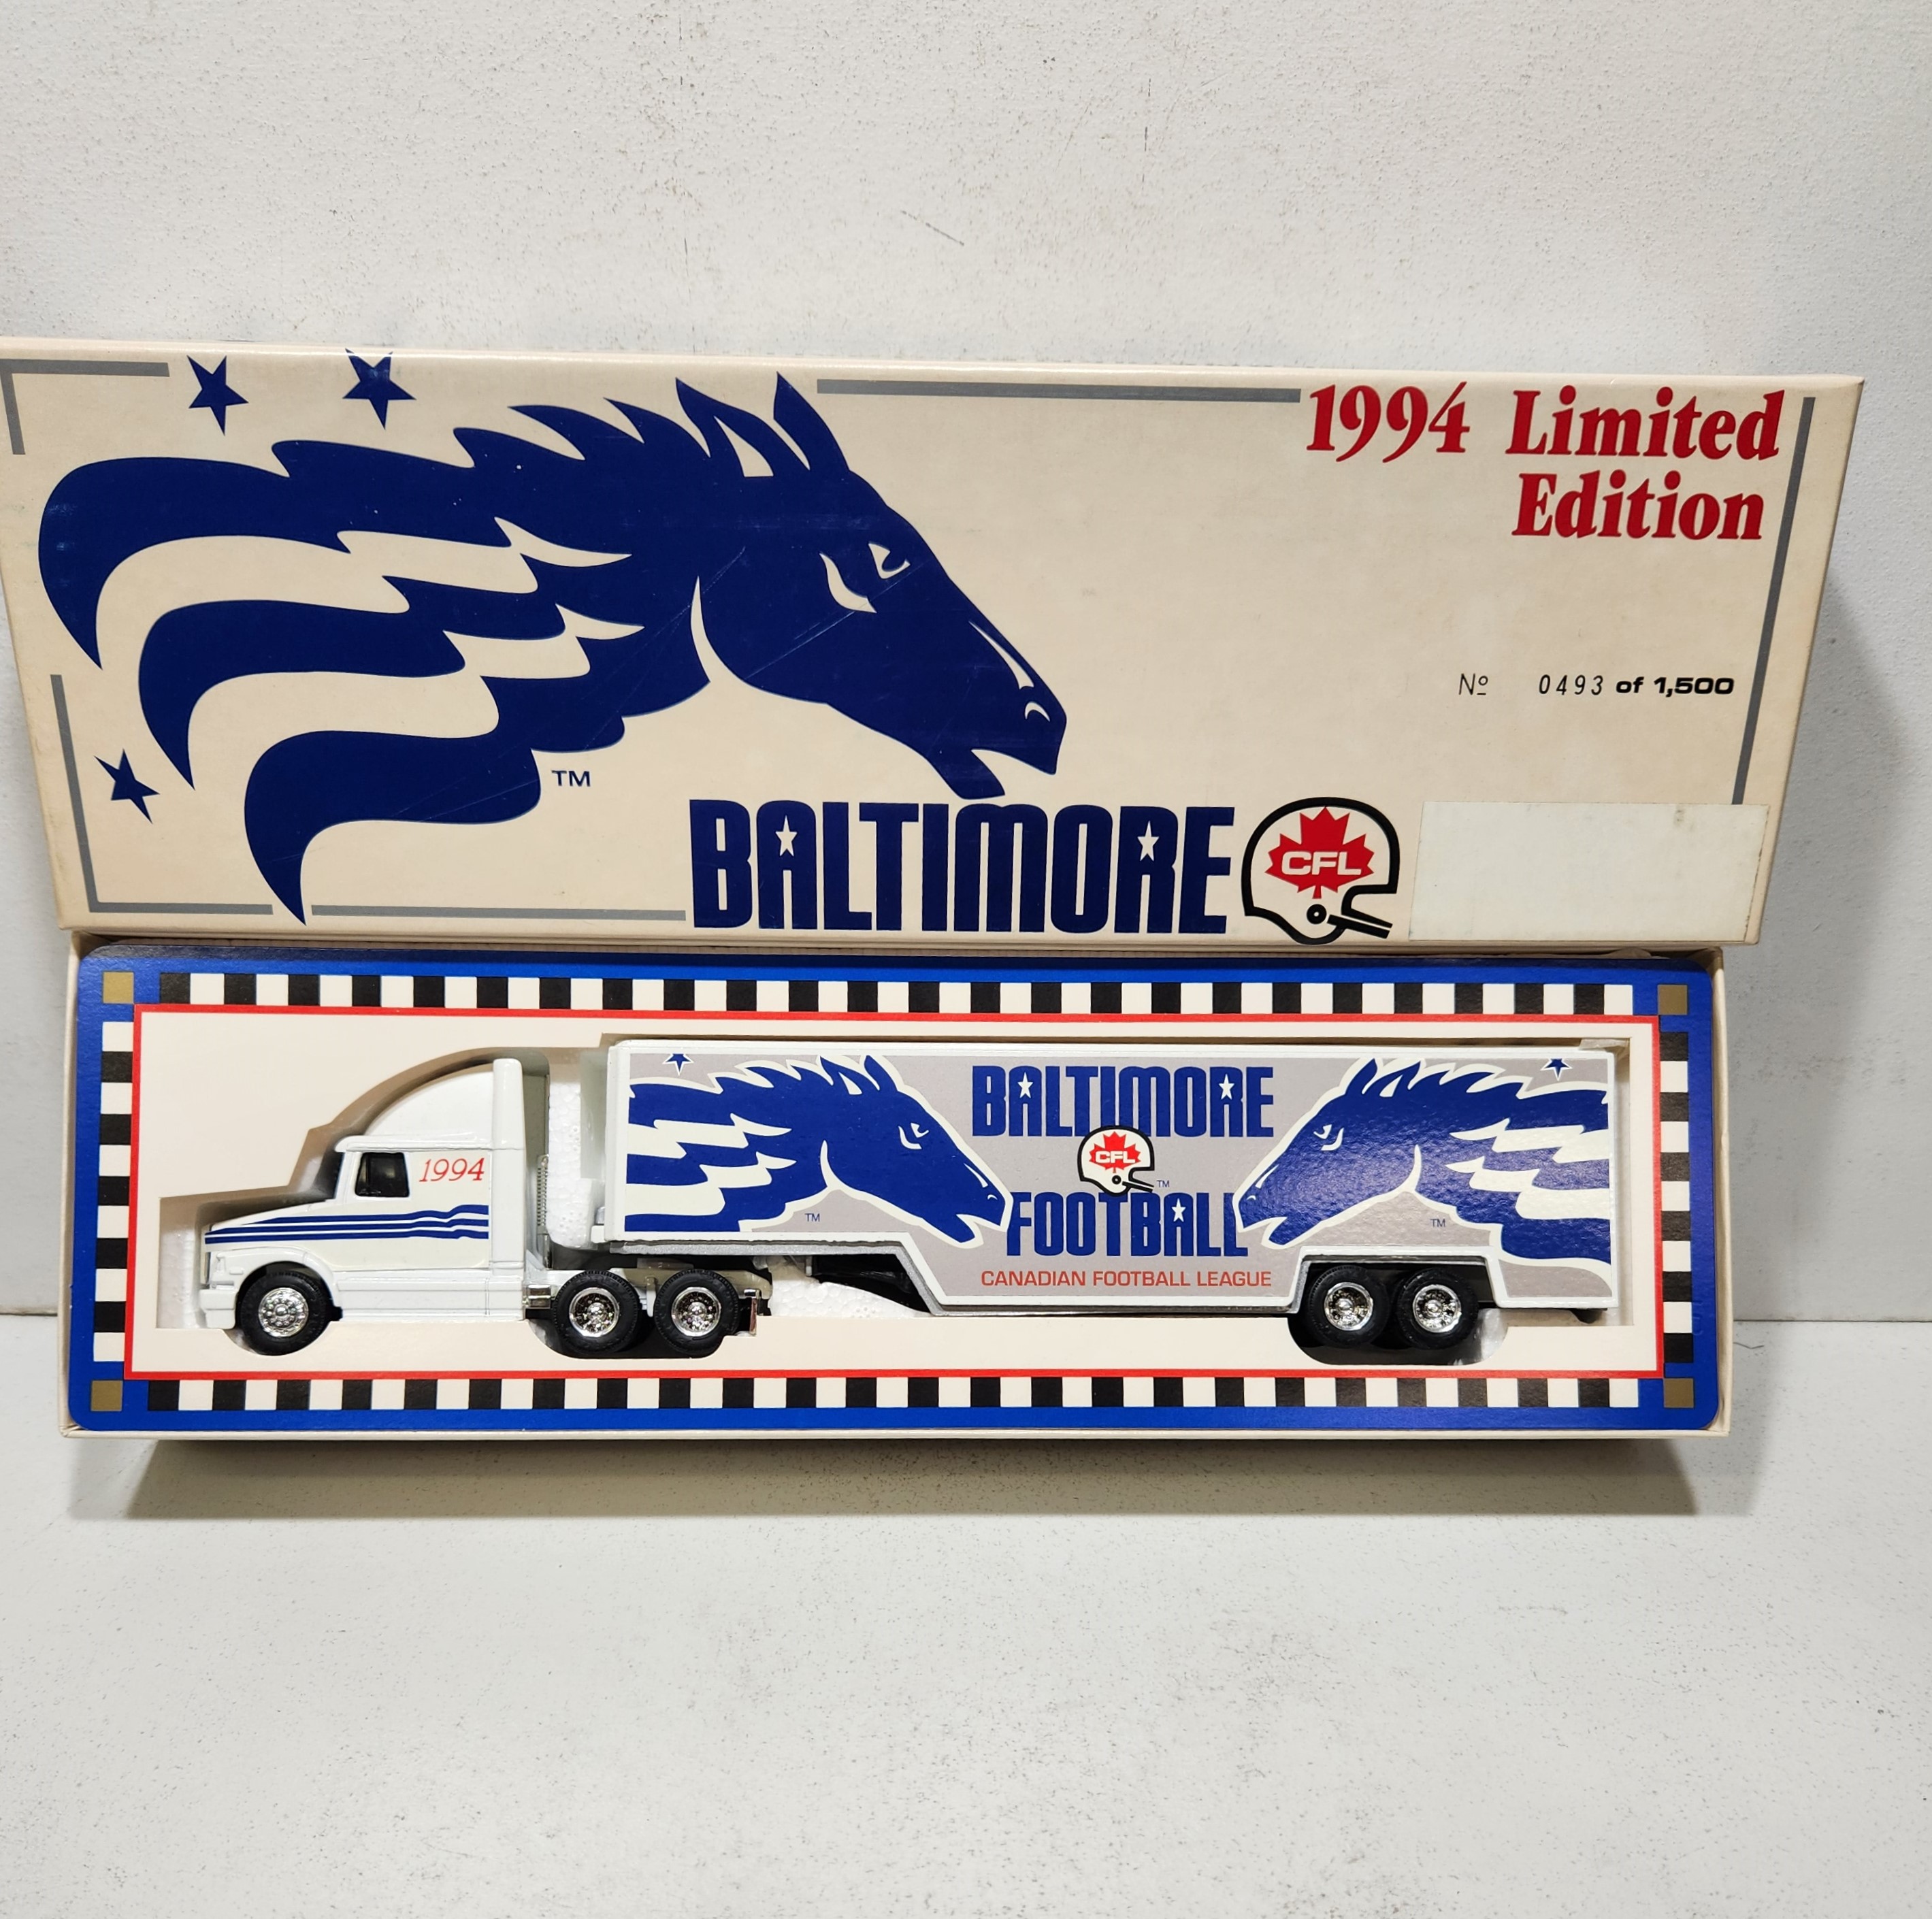 1994 Baltimore Stallions 1/64th "Canadian Football League" Transporter by Ertl